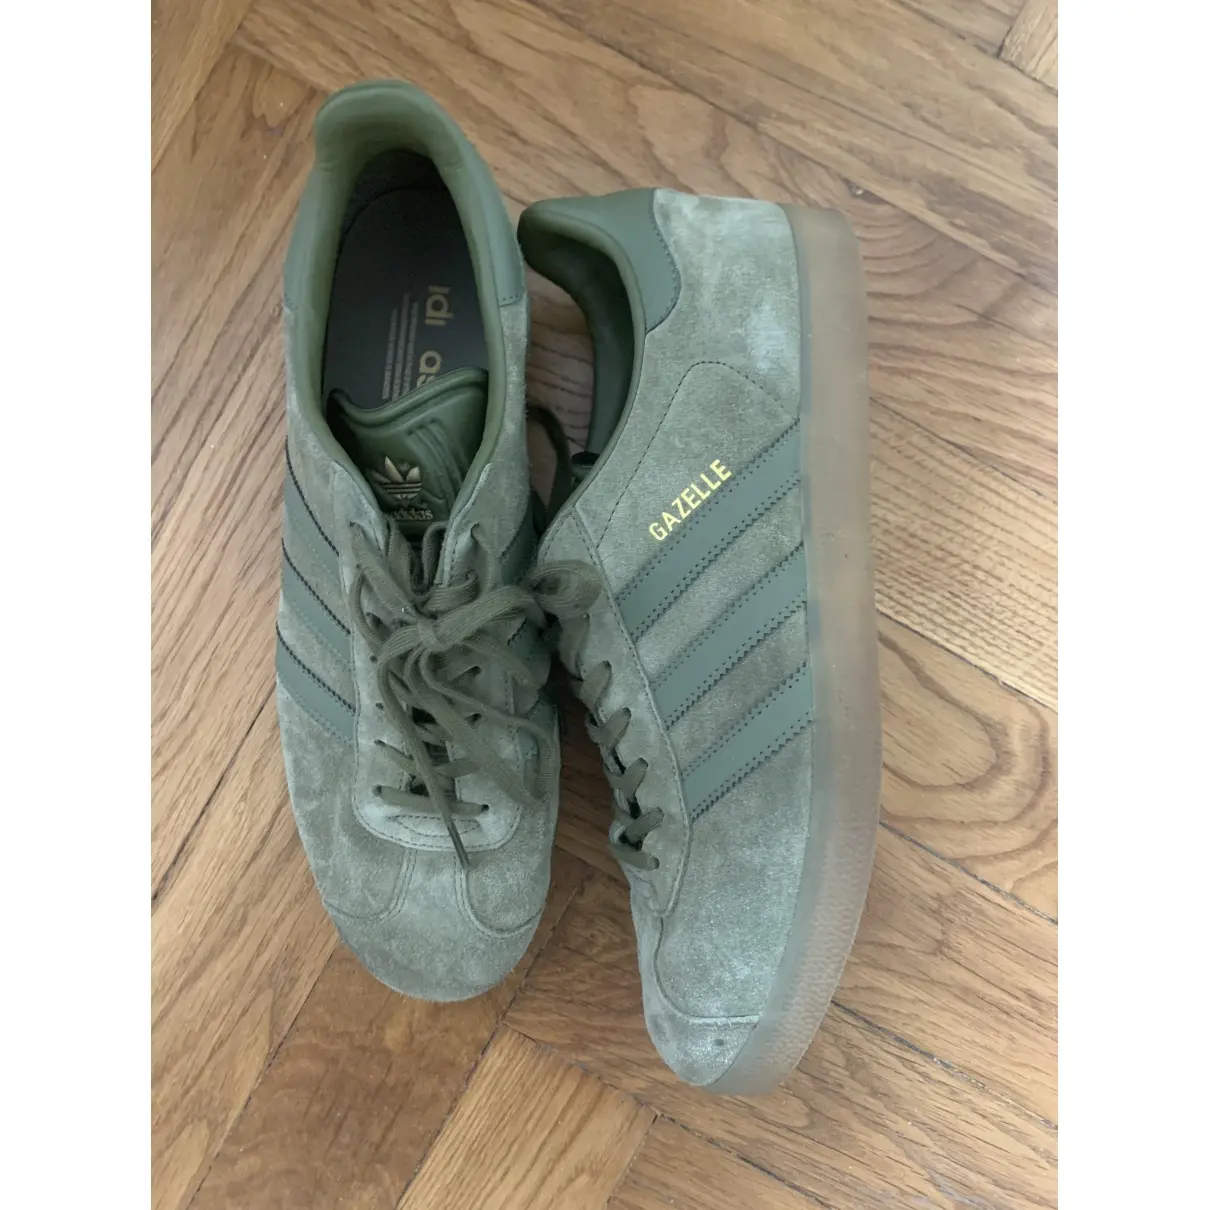 Adidas Gazelle low trainers for sale